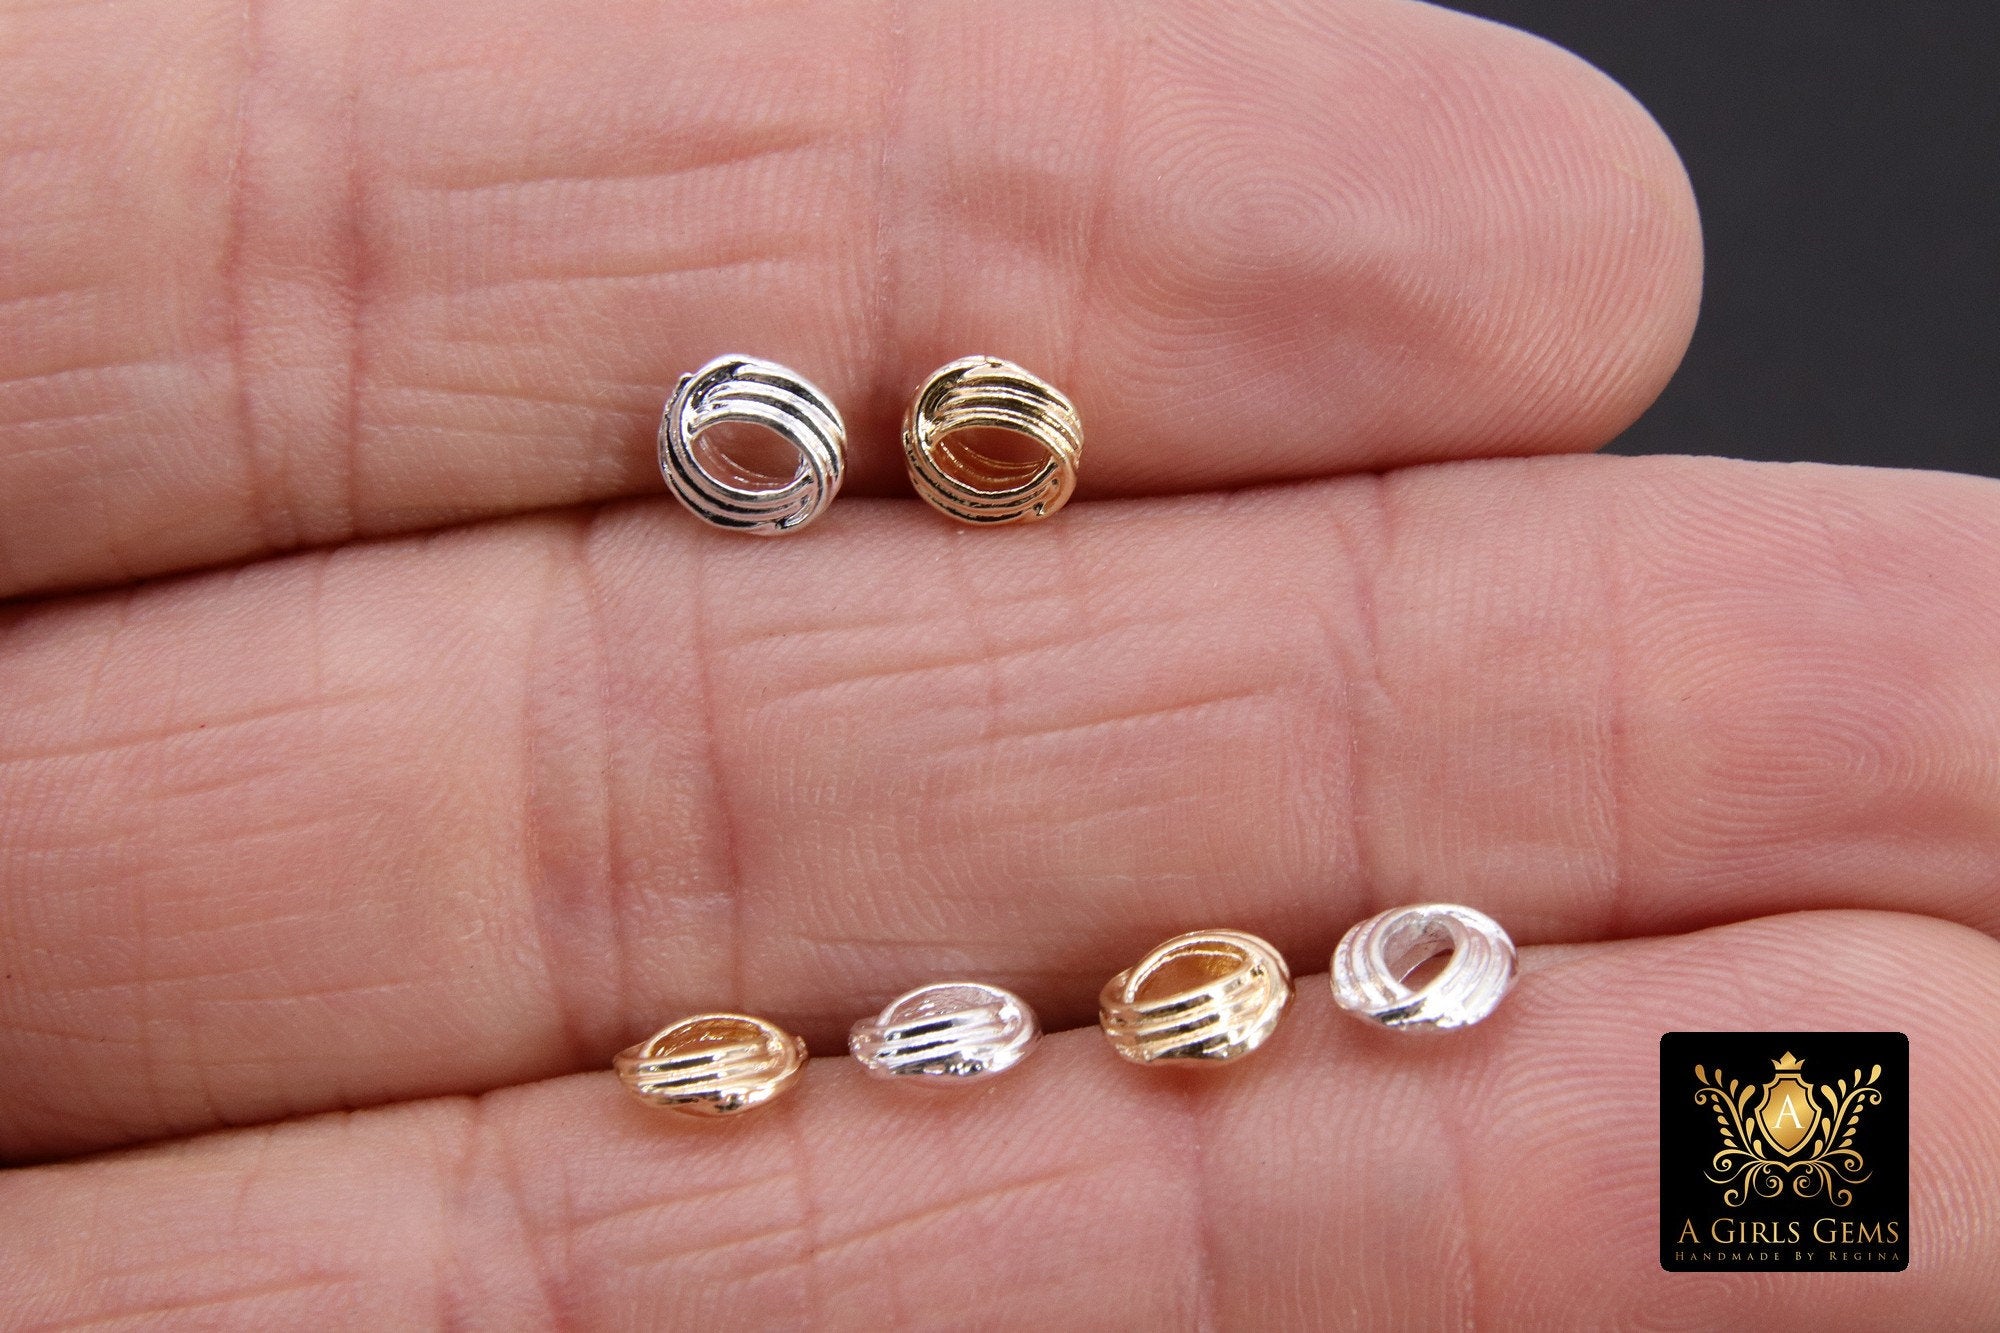 Gold Twist Spacer Beads, 6 mm Round Silver Soldered Jump Rings #3475, Fancy Bumpy Bright Silver Ring Twist